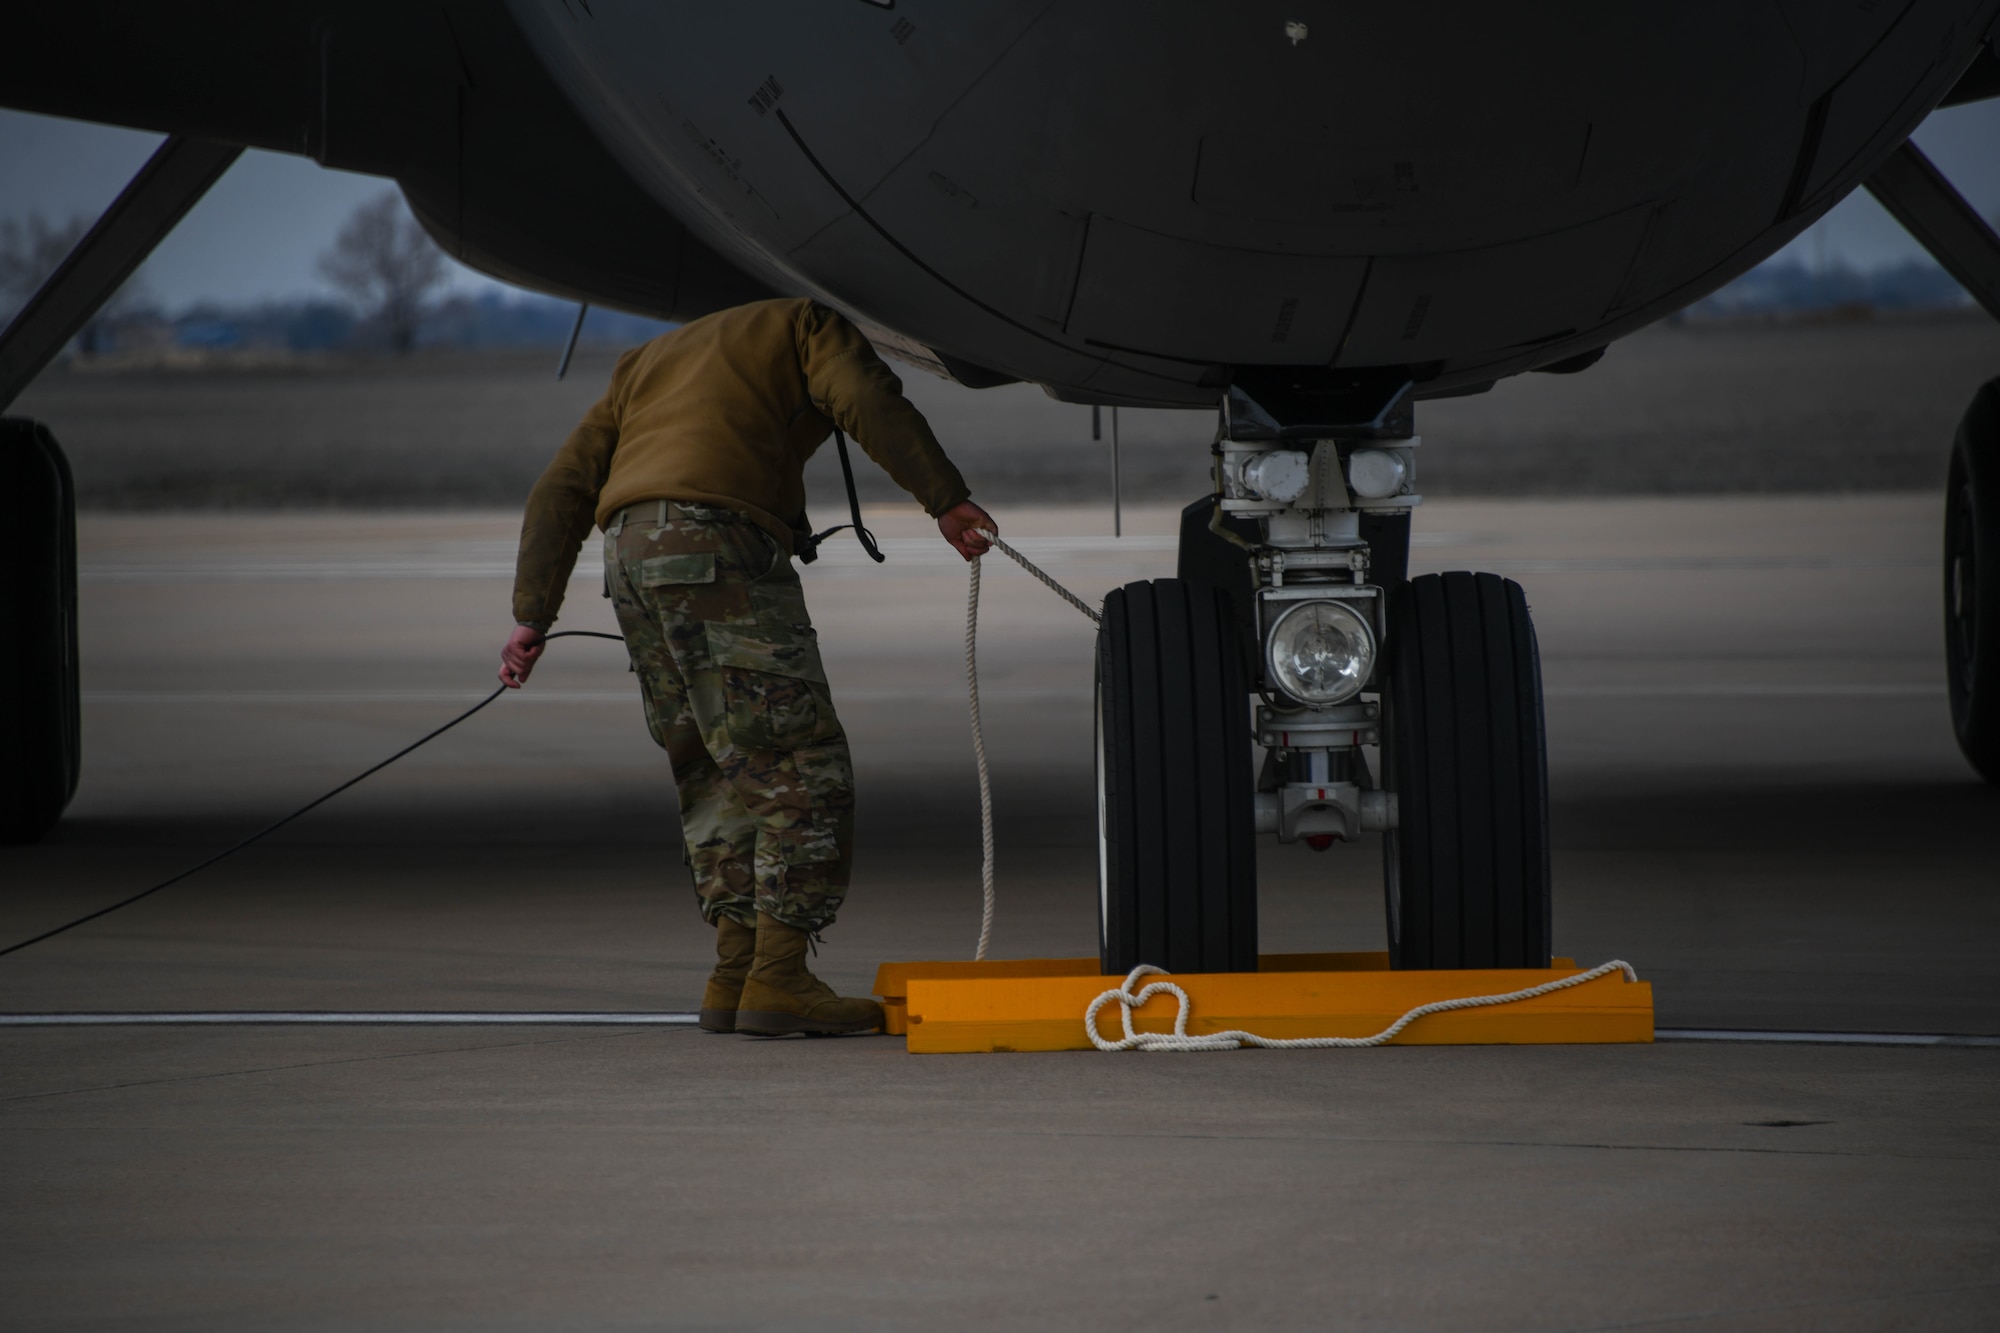 U.S. Air Force Tech. Sgt. Austin Shackelford, 190th Aircraft Maintenance Squadron (AMXS) crew chief, places a wheel chock at the wheel of a KC-135 Stratotanker at Altus Air Force Base (AFB), Oklahoma, Feb. 2, 2024. 97th Maintenance Group personnel coordinated approval for Hot Pit Refueling Permanent Site Certification at Altus AFB, providing off-site contingency training for other units to utilize. (U.S. Air Force photo by Senior Airman Miyah Gray)